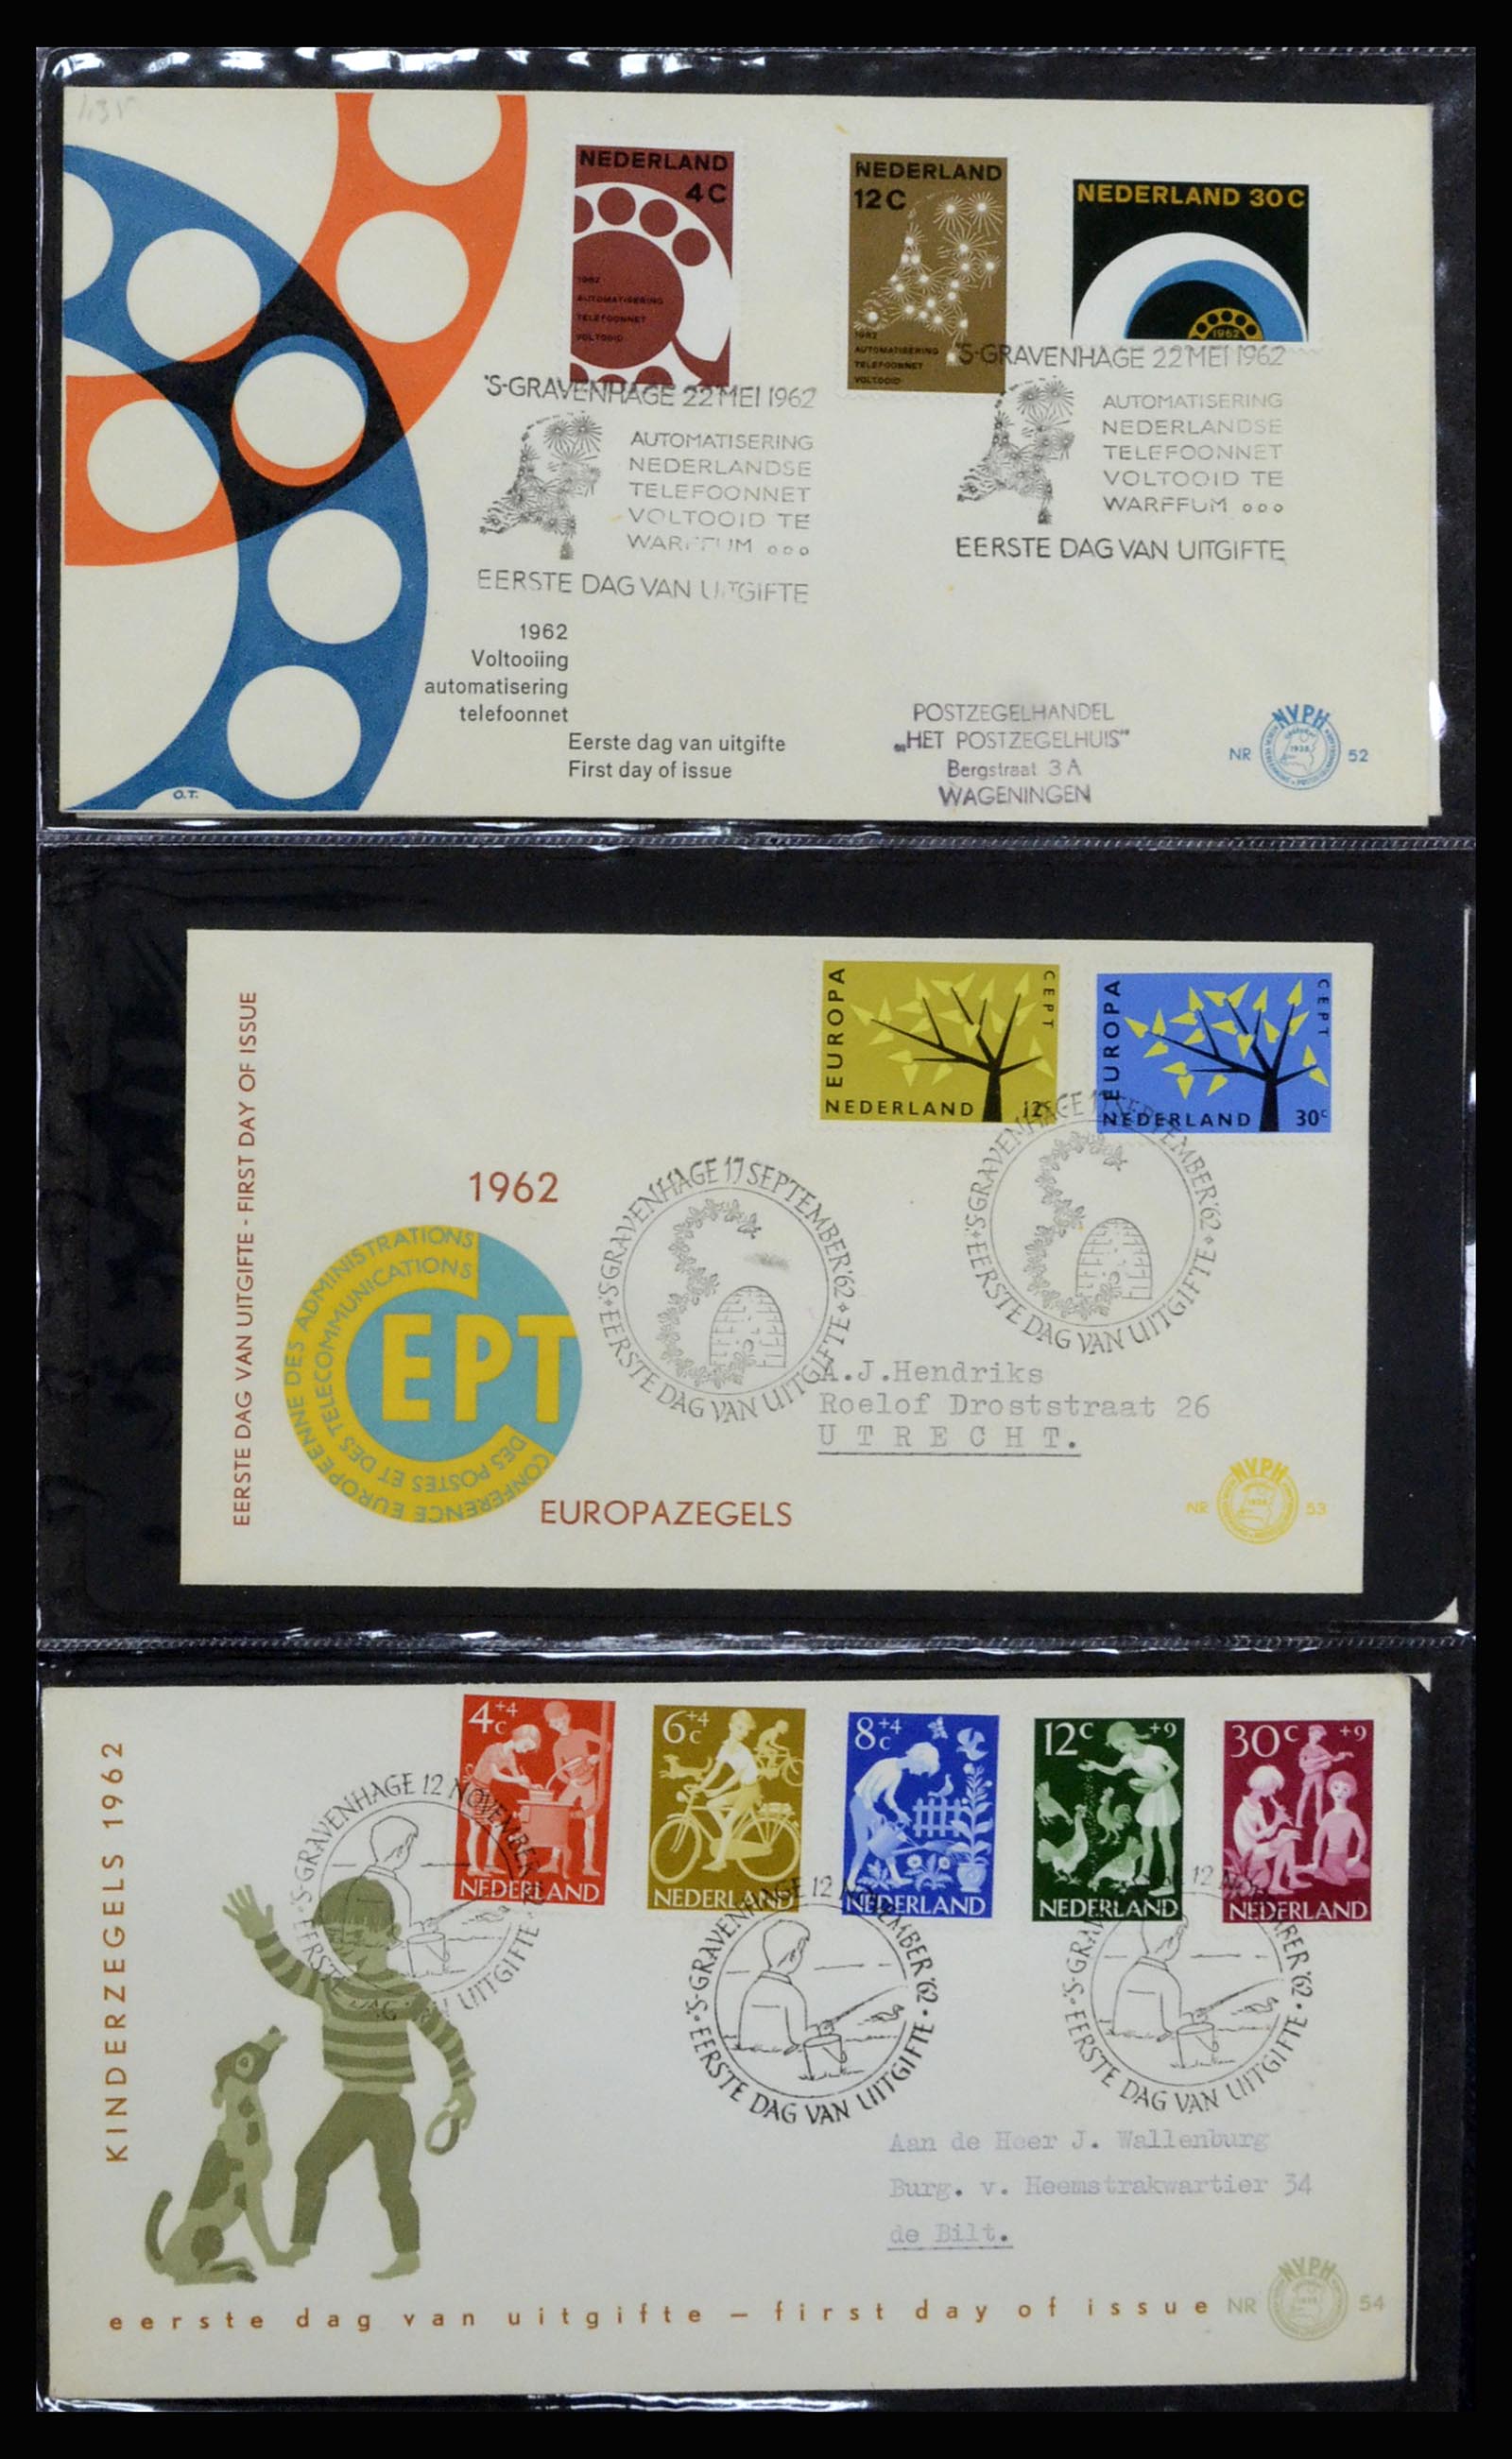 37197 019 - Stamp collection 37197 Netherlands FDC's 1950-2004.